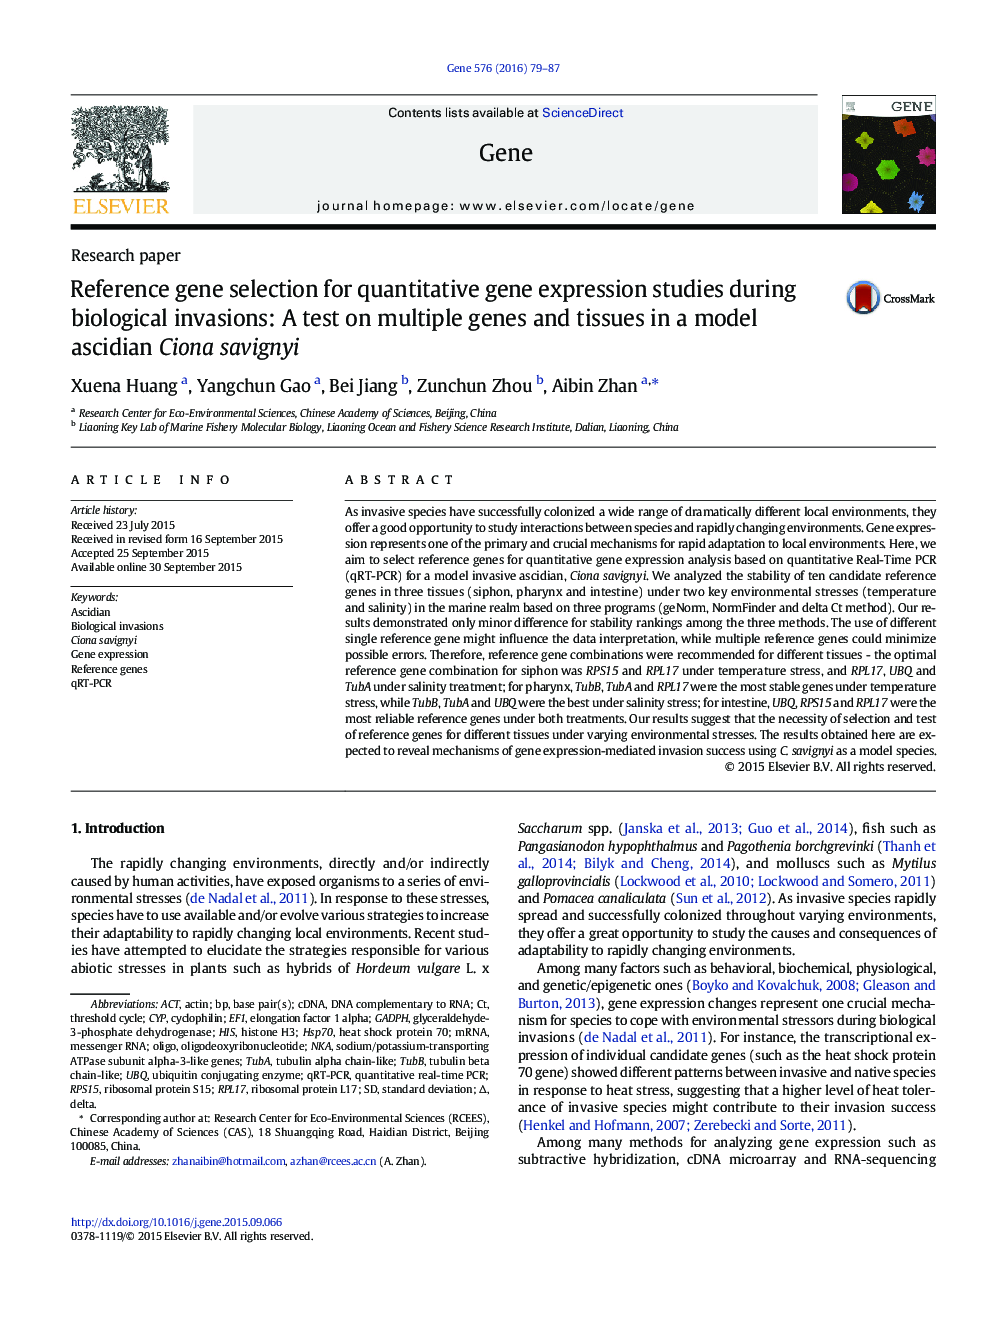 Reference gene selection for quantitative gene expression studies during biological invasions: A test on multiple genes and tissues in a model ascidian Ciona savignyi